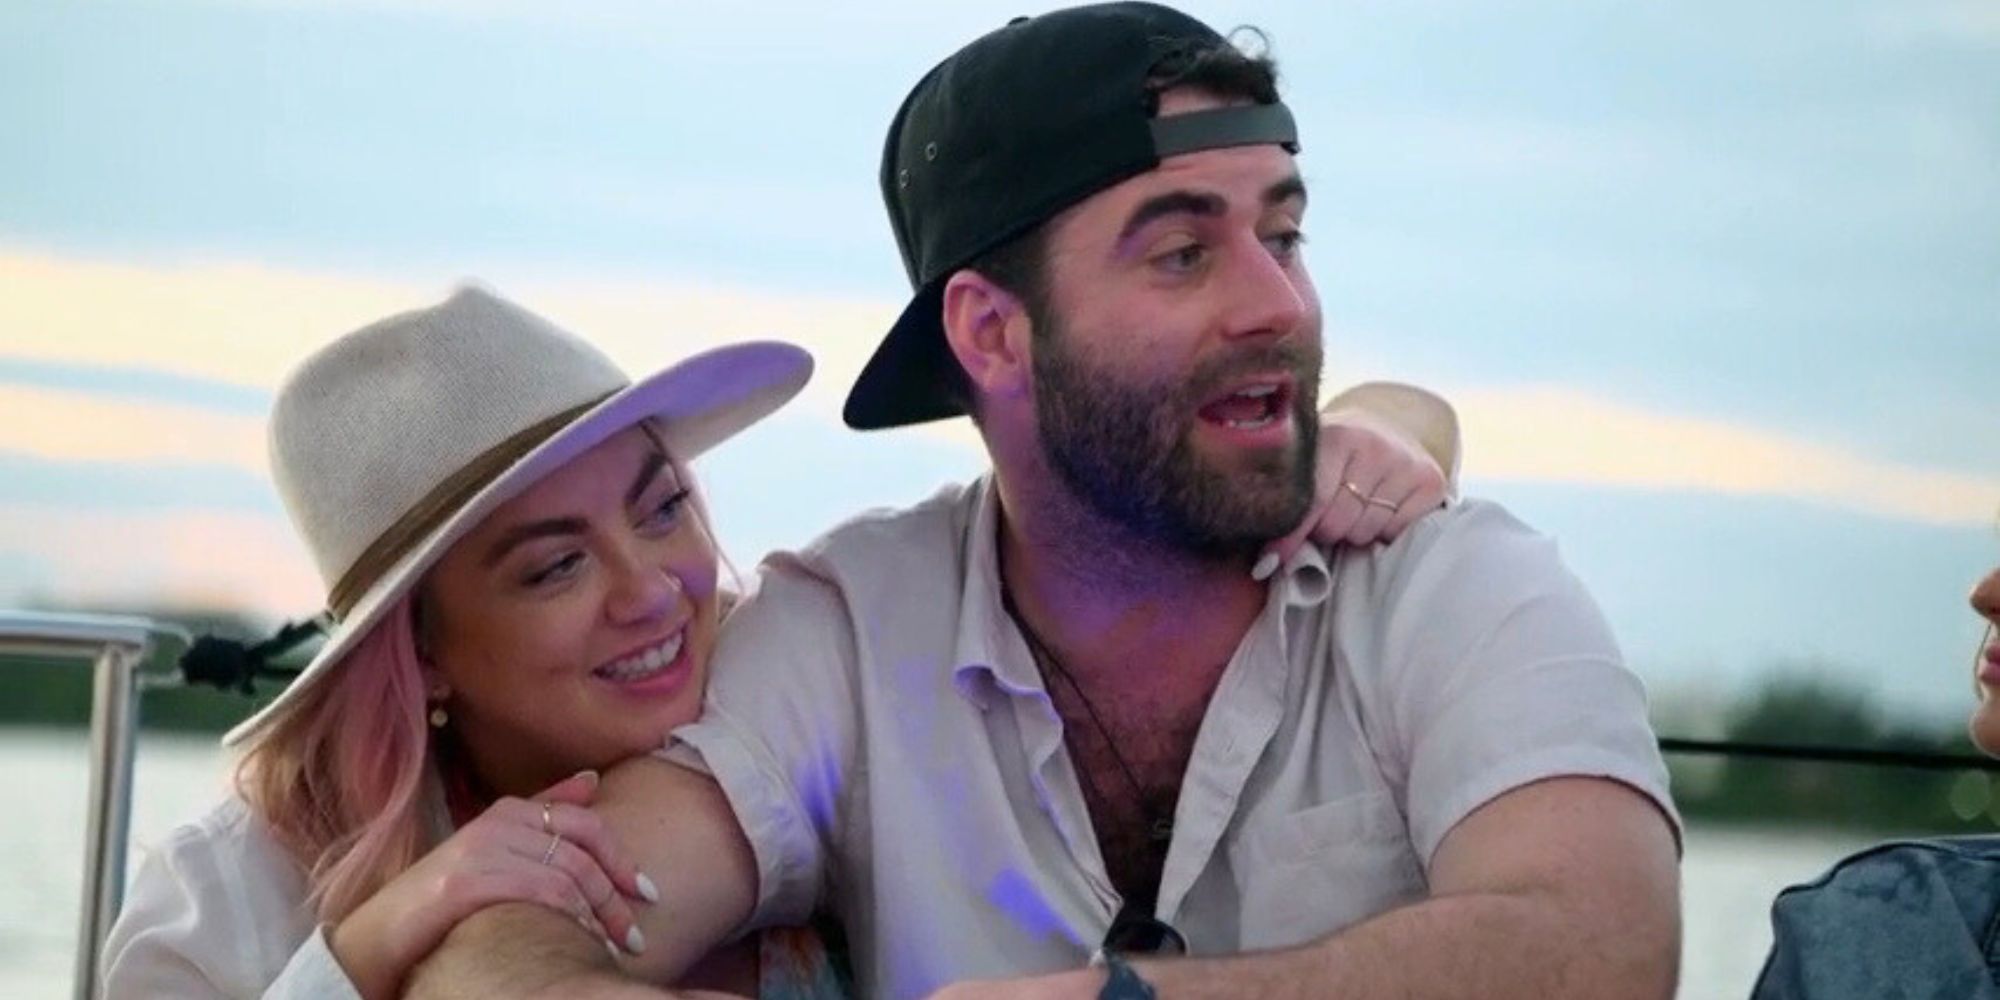 Married At First Sight Season 17: The Real Reason Austin & Becca Haven’t Talked About The “Hard Stuff” In Their Relationship